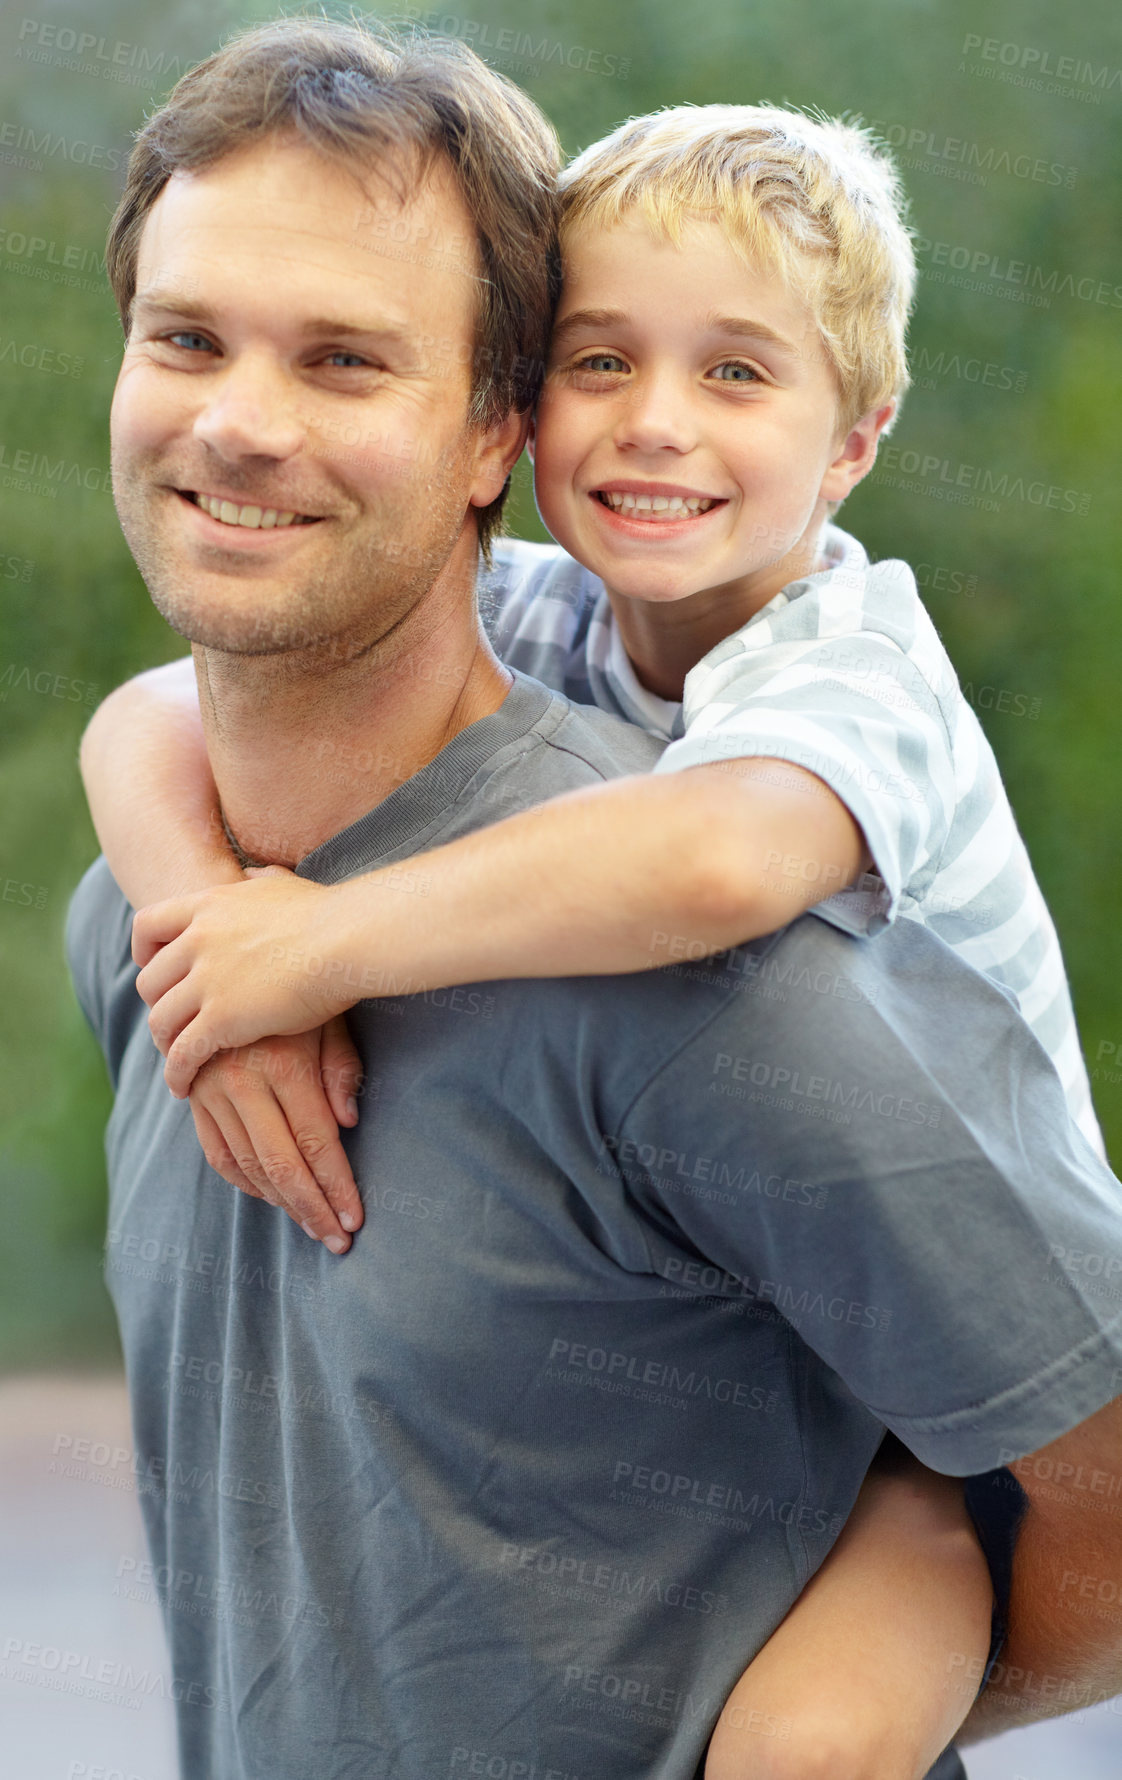 Buy stock photo Piggy back, portrait of father and son in garden, cute bonding together with care and love in backyard. Outdoor fun, support and dad holding playful child with smile, trust and happy man with kid.